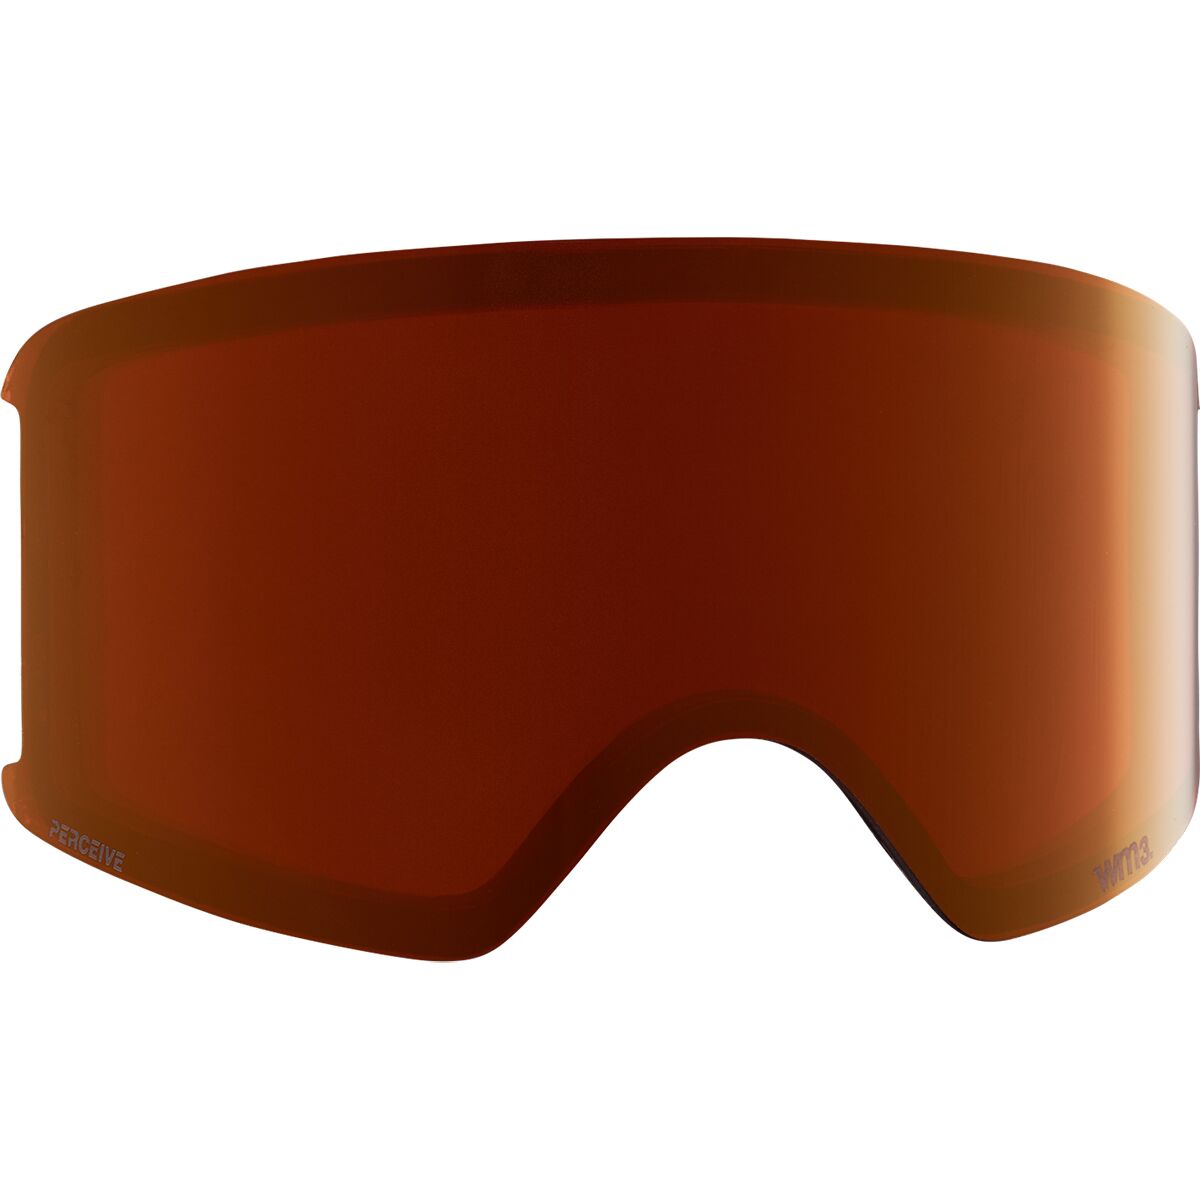 Anon WM3 PERCEIVE Goggles Replacement Lens - Women's